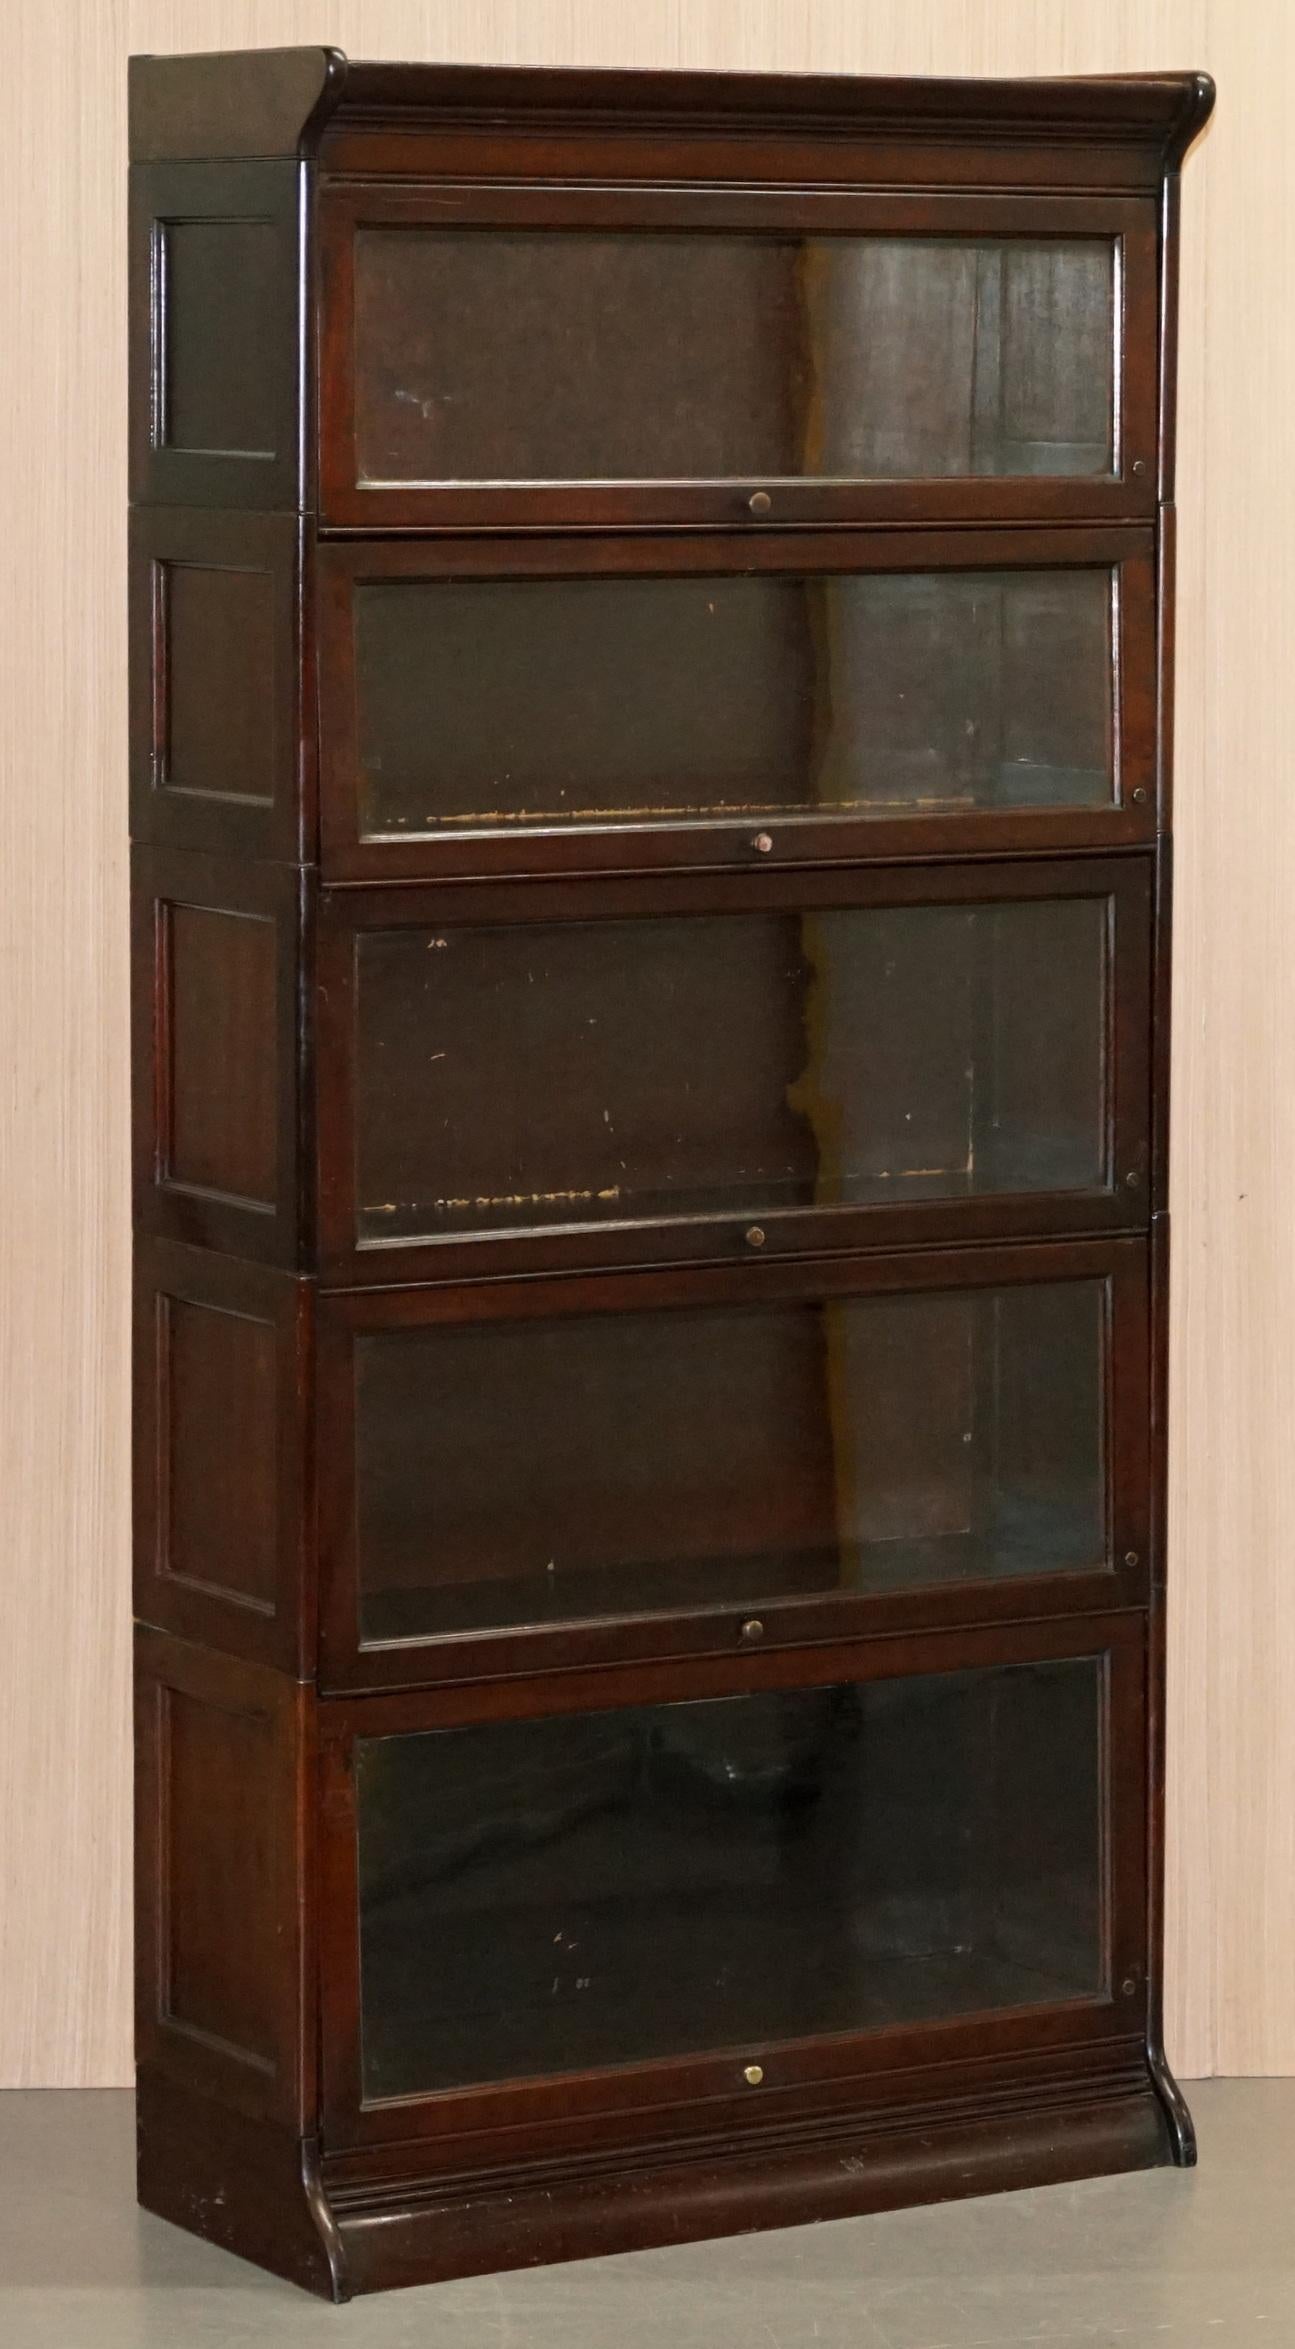 We are delighted to offer for sale this very rare suite of four Legal Library stacking modular bookcases by Grand Rapids chair and bookcase Co. circa 1880 in panelled mahogany

These are as rare as they come, you will see plenty of the Globe